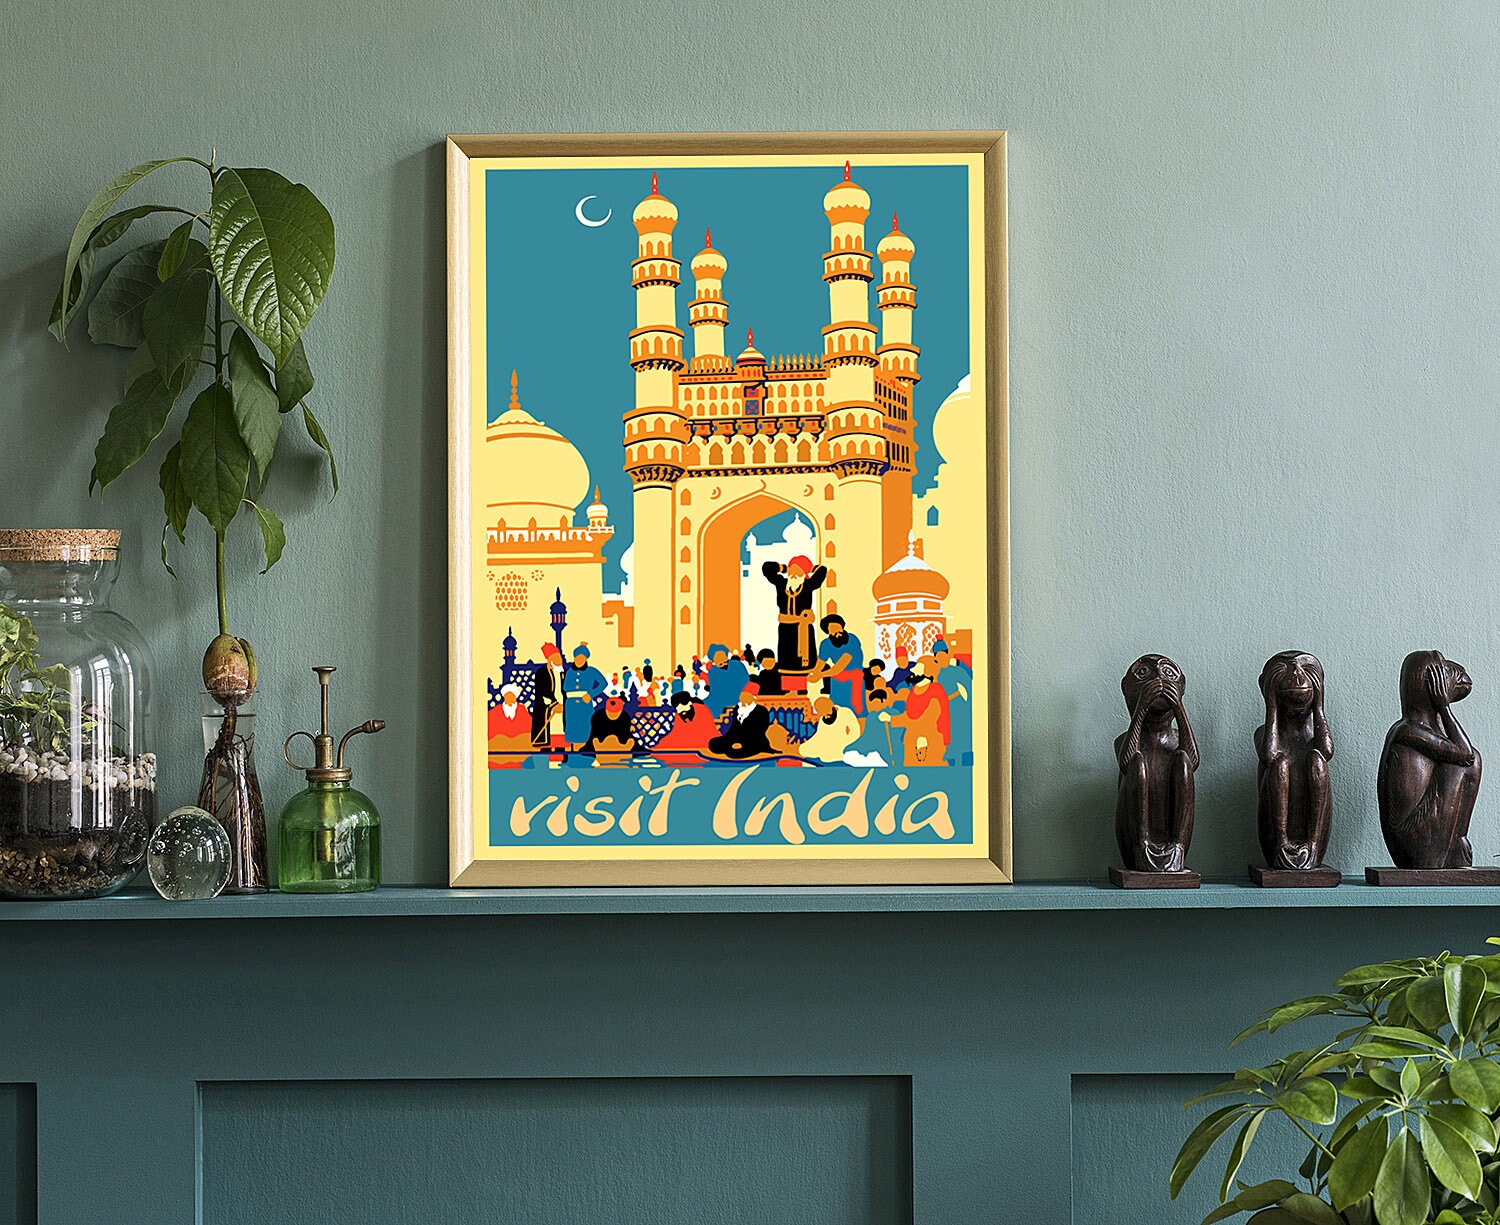 India Vintage Rustic Poster Print, Retro Style Travel Poster Print